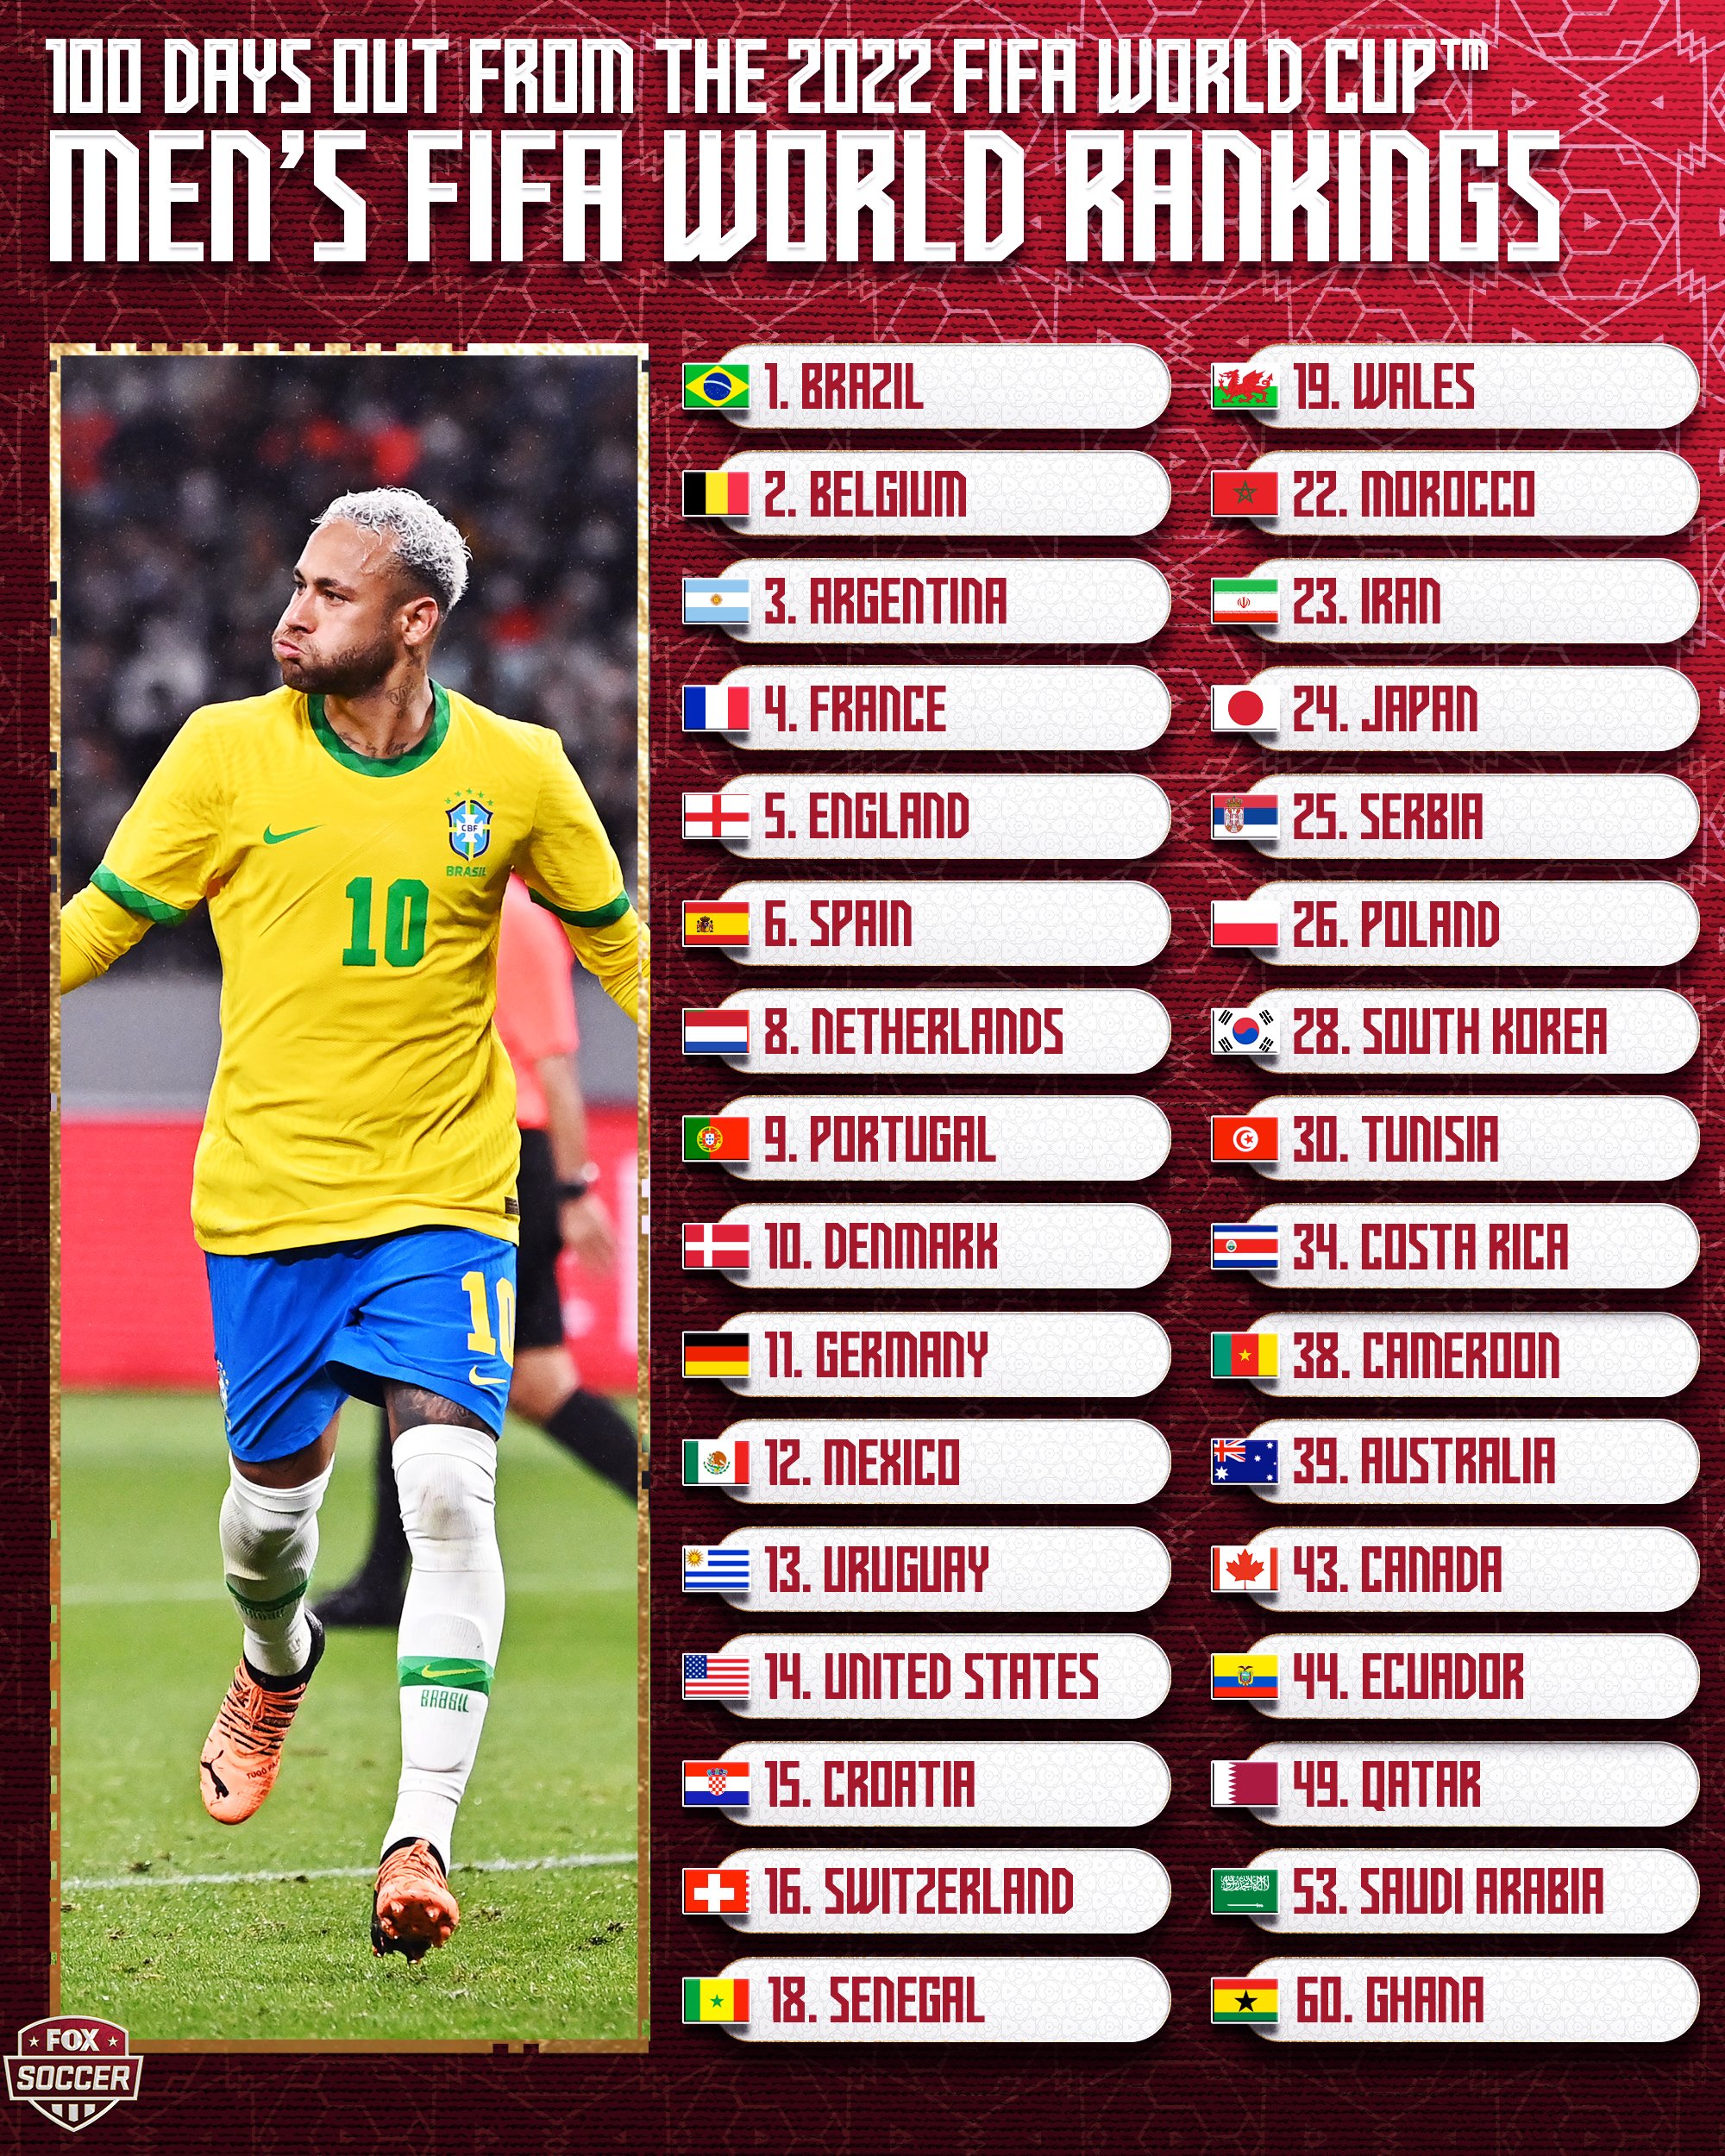 FOX Soccer on Twitter: "Here's the FIFA ranking for every in the 2022 FIFA World Cup 📊 Which team is the most underrated? https://t.co/MJUYxZpBQP" Twitter